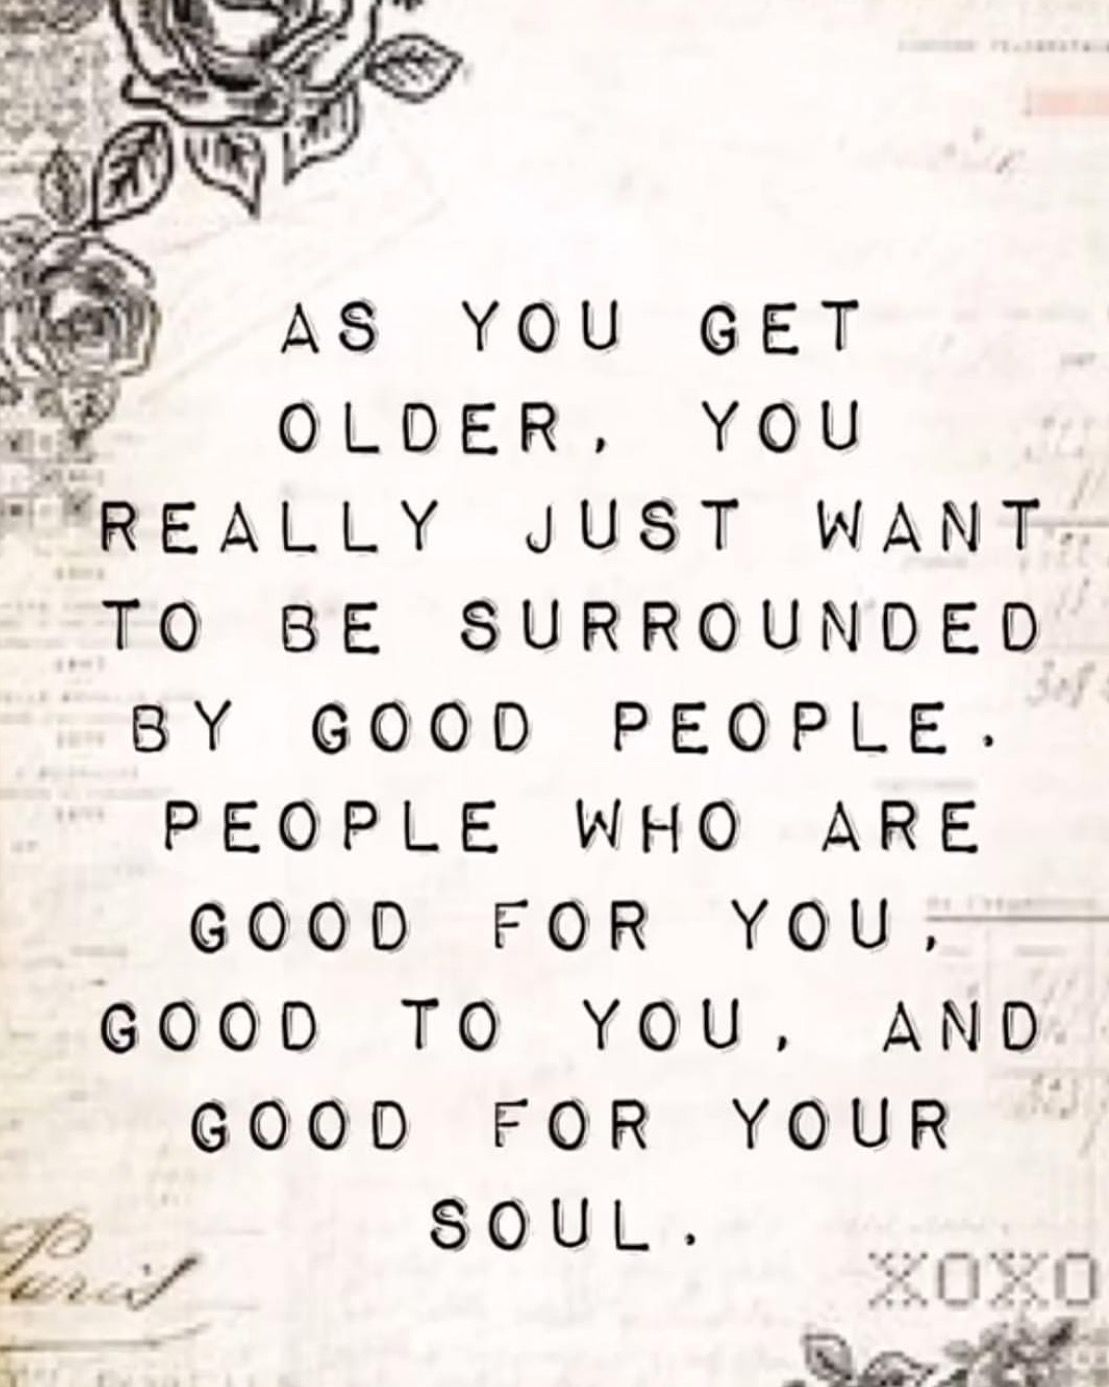 quote on aging and good people - Brenda Kinsel